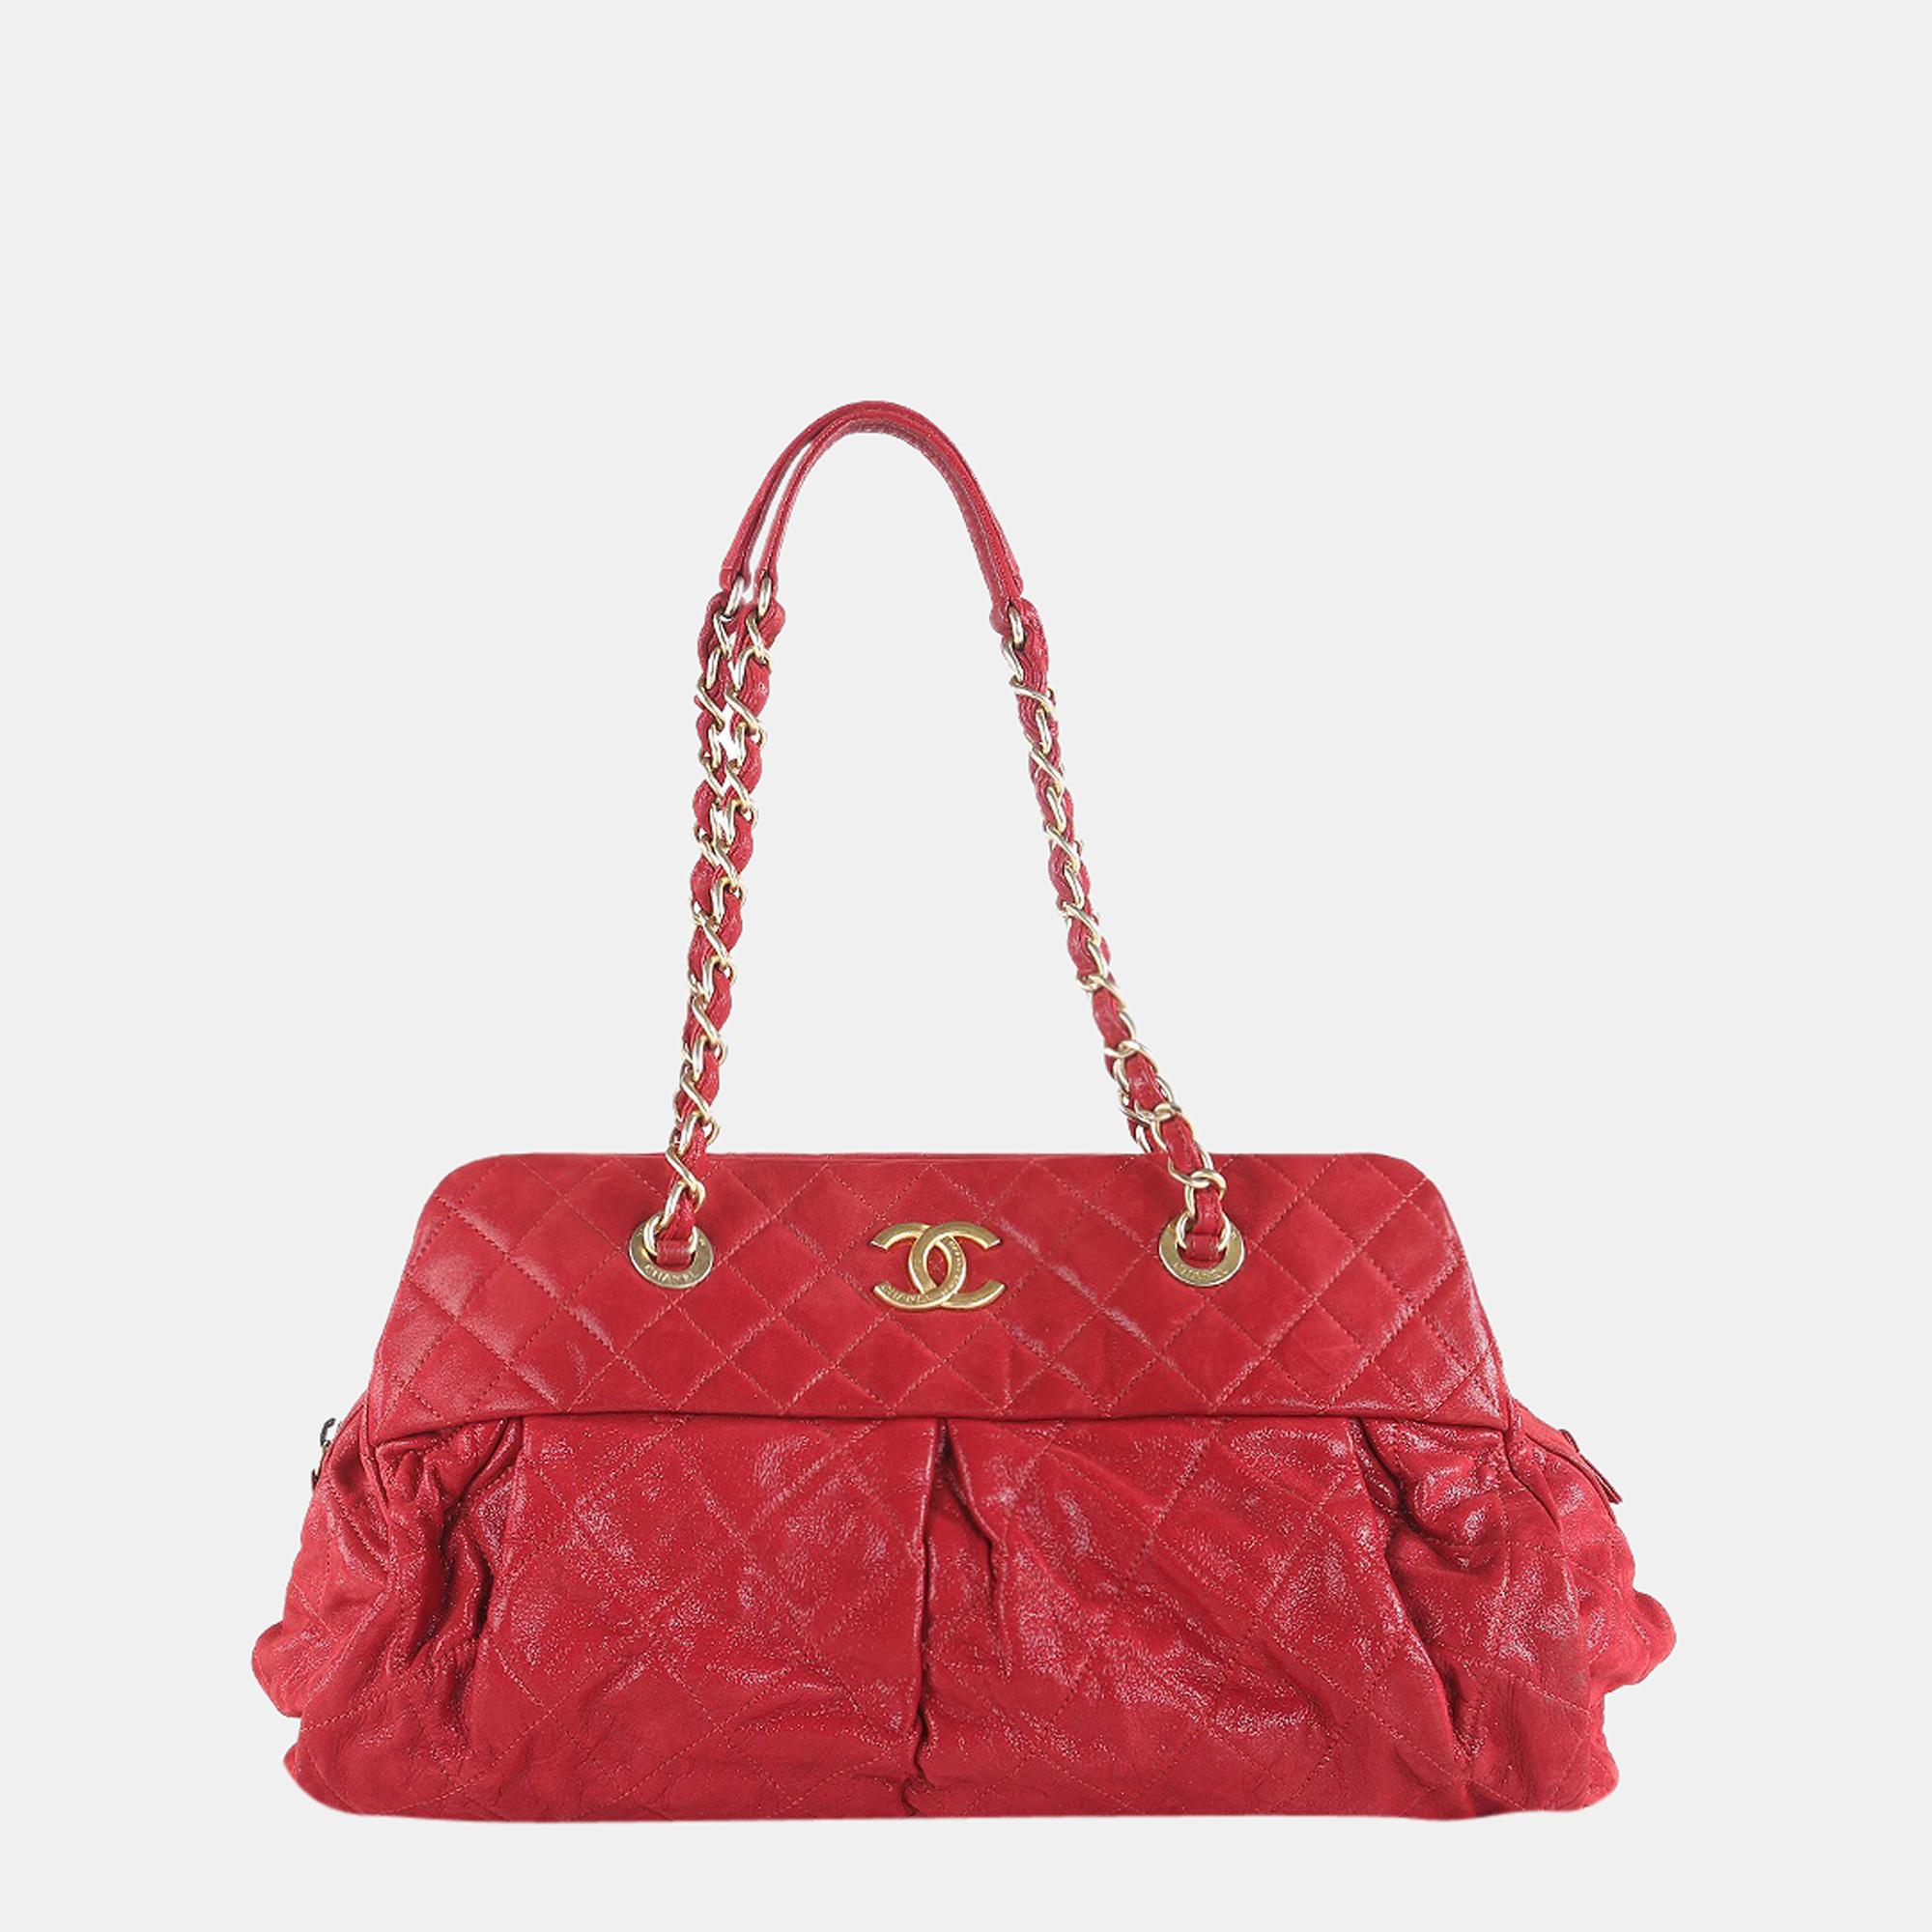 Chanel Shiny Red Quilted Leather Shoulder Bag